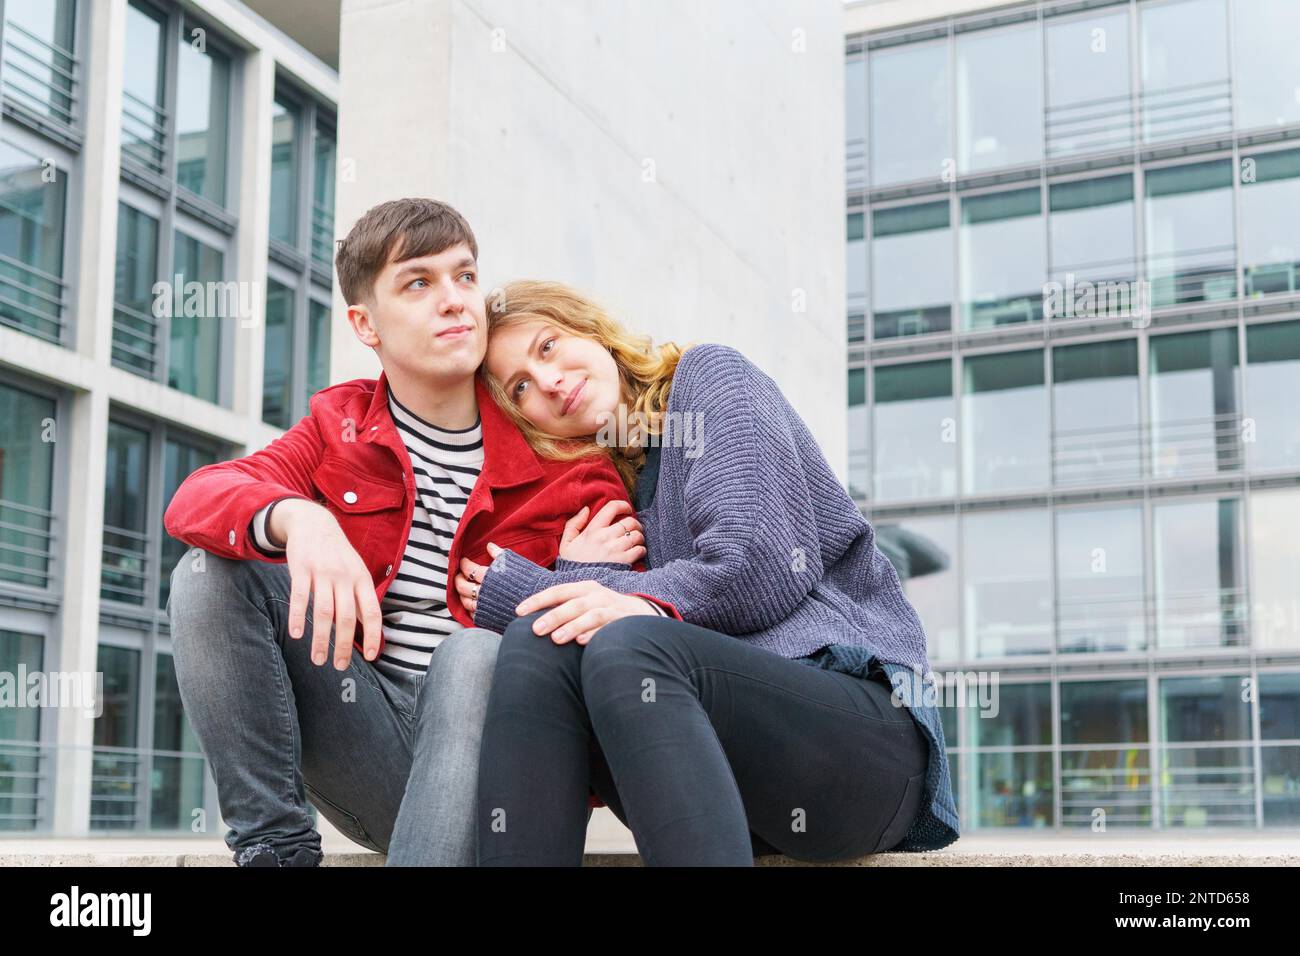 young affectionate heterosexual couple sitting on steps in front of modern building with glass facade Stock Photo